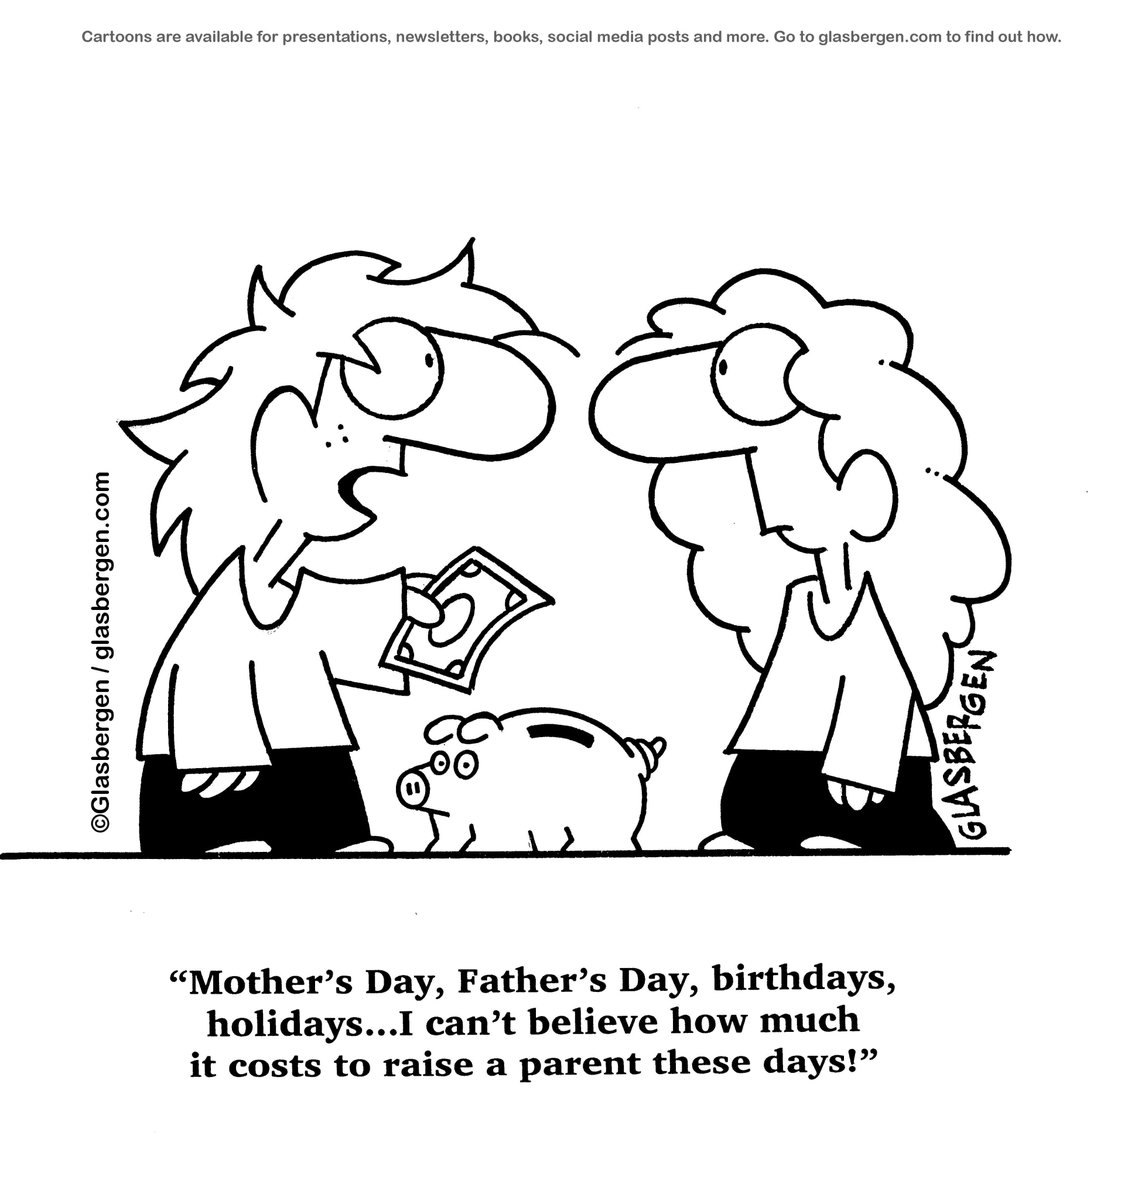 Happy Mother's Day from Glasbergen Cartoon Service!

#mothersday #costofliving #familyhumor